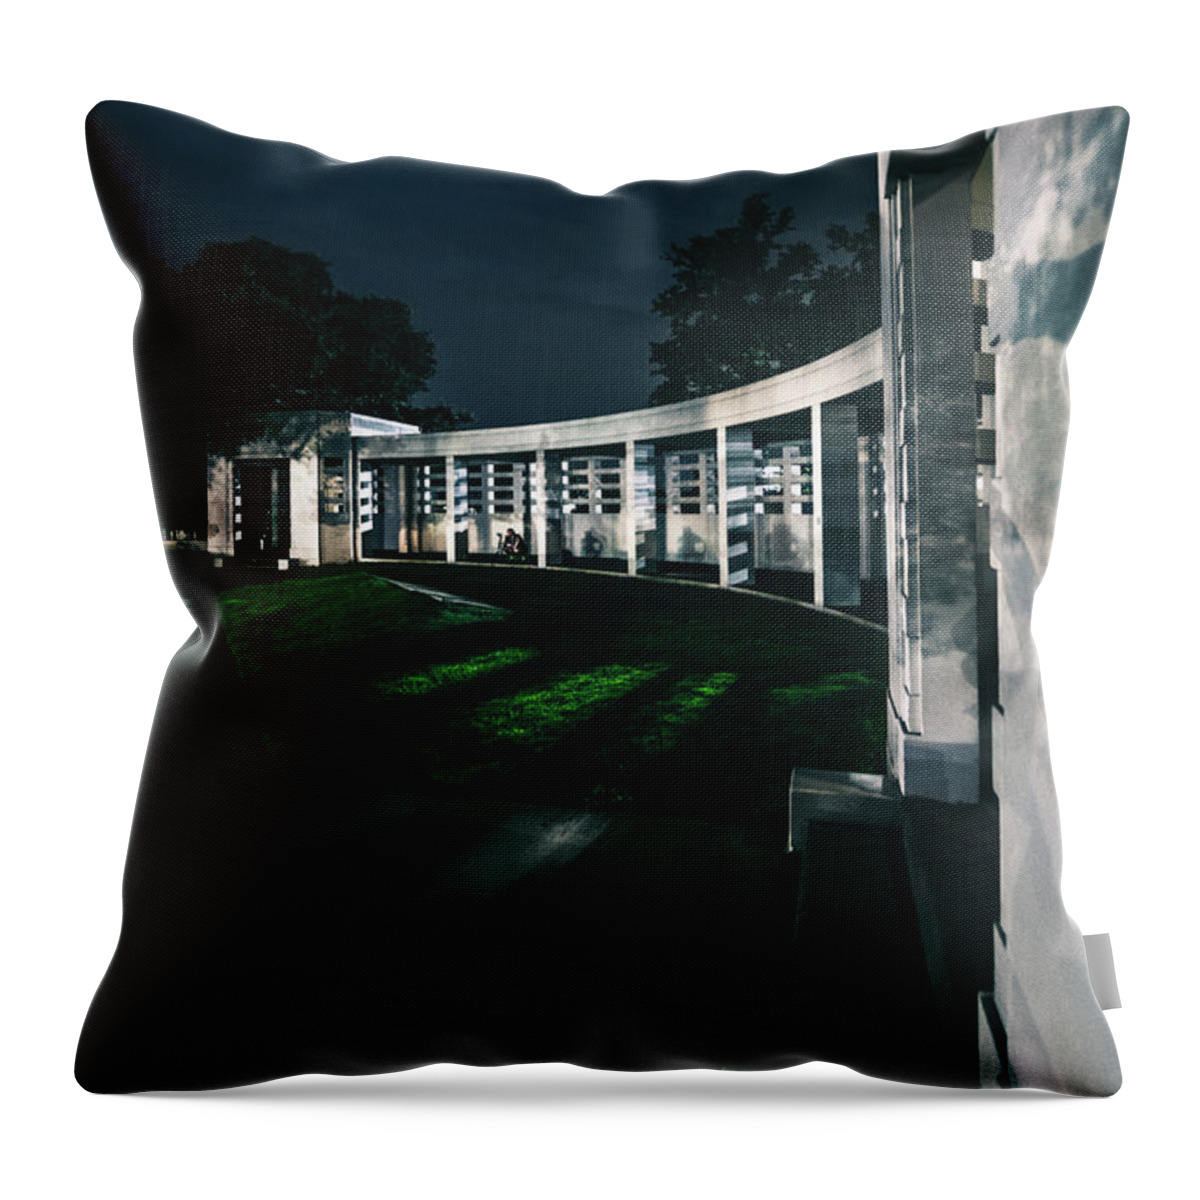 Grassy Throw Pillow featuring the photograph Grassy Knoll by Peter Hull